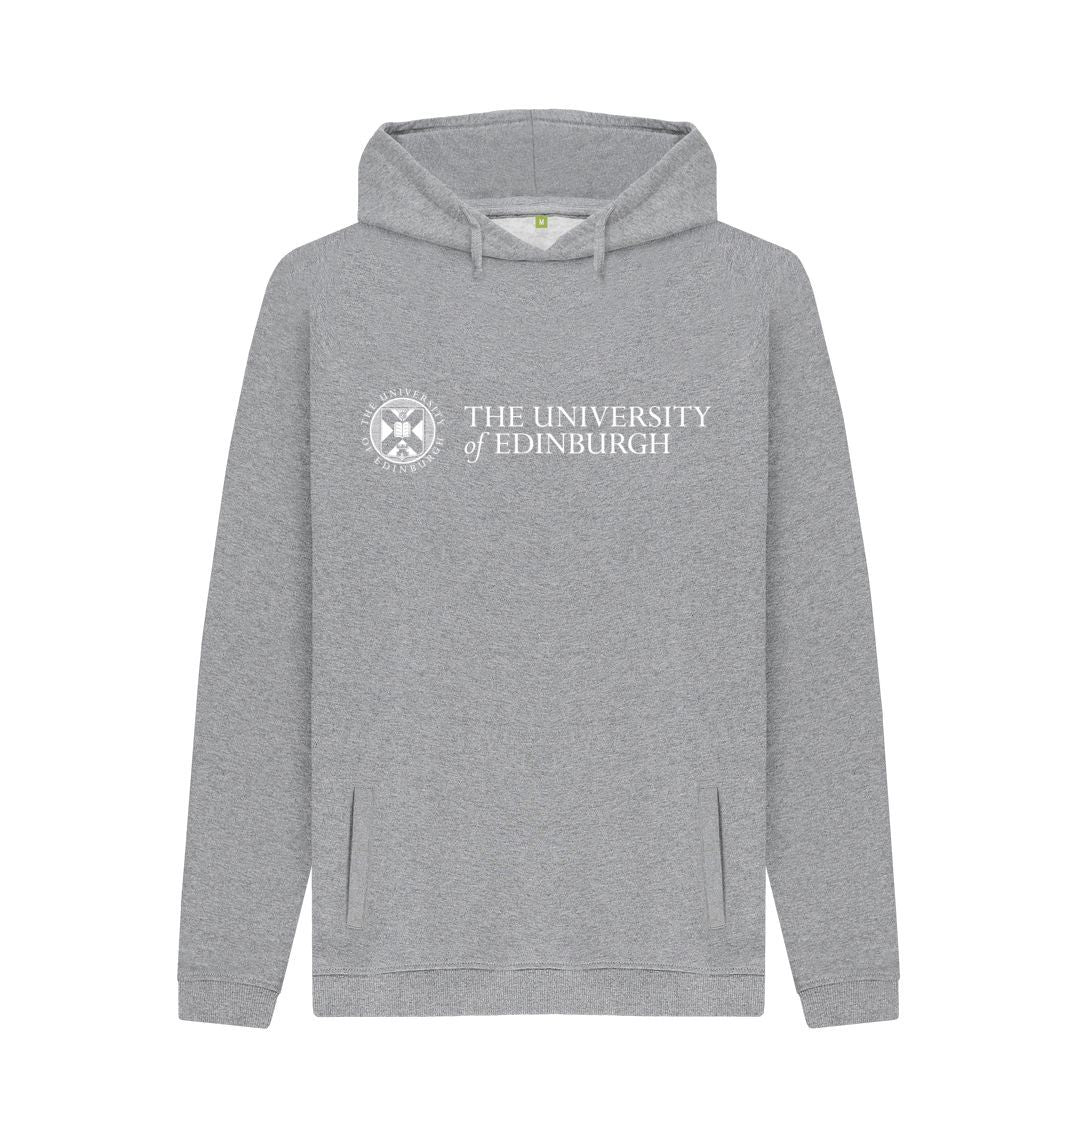 A grey pullover hoodie with the University logo printed across the chest in white